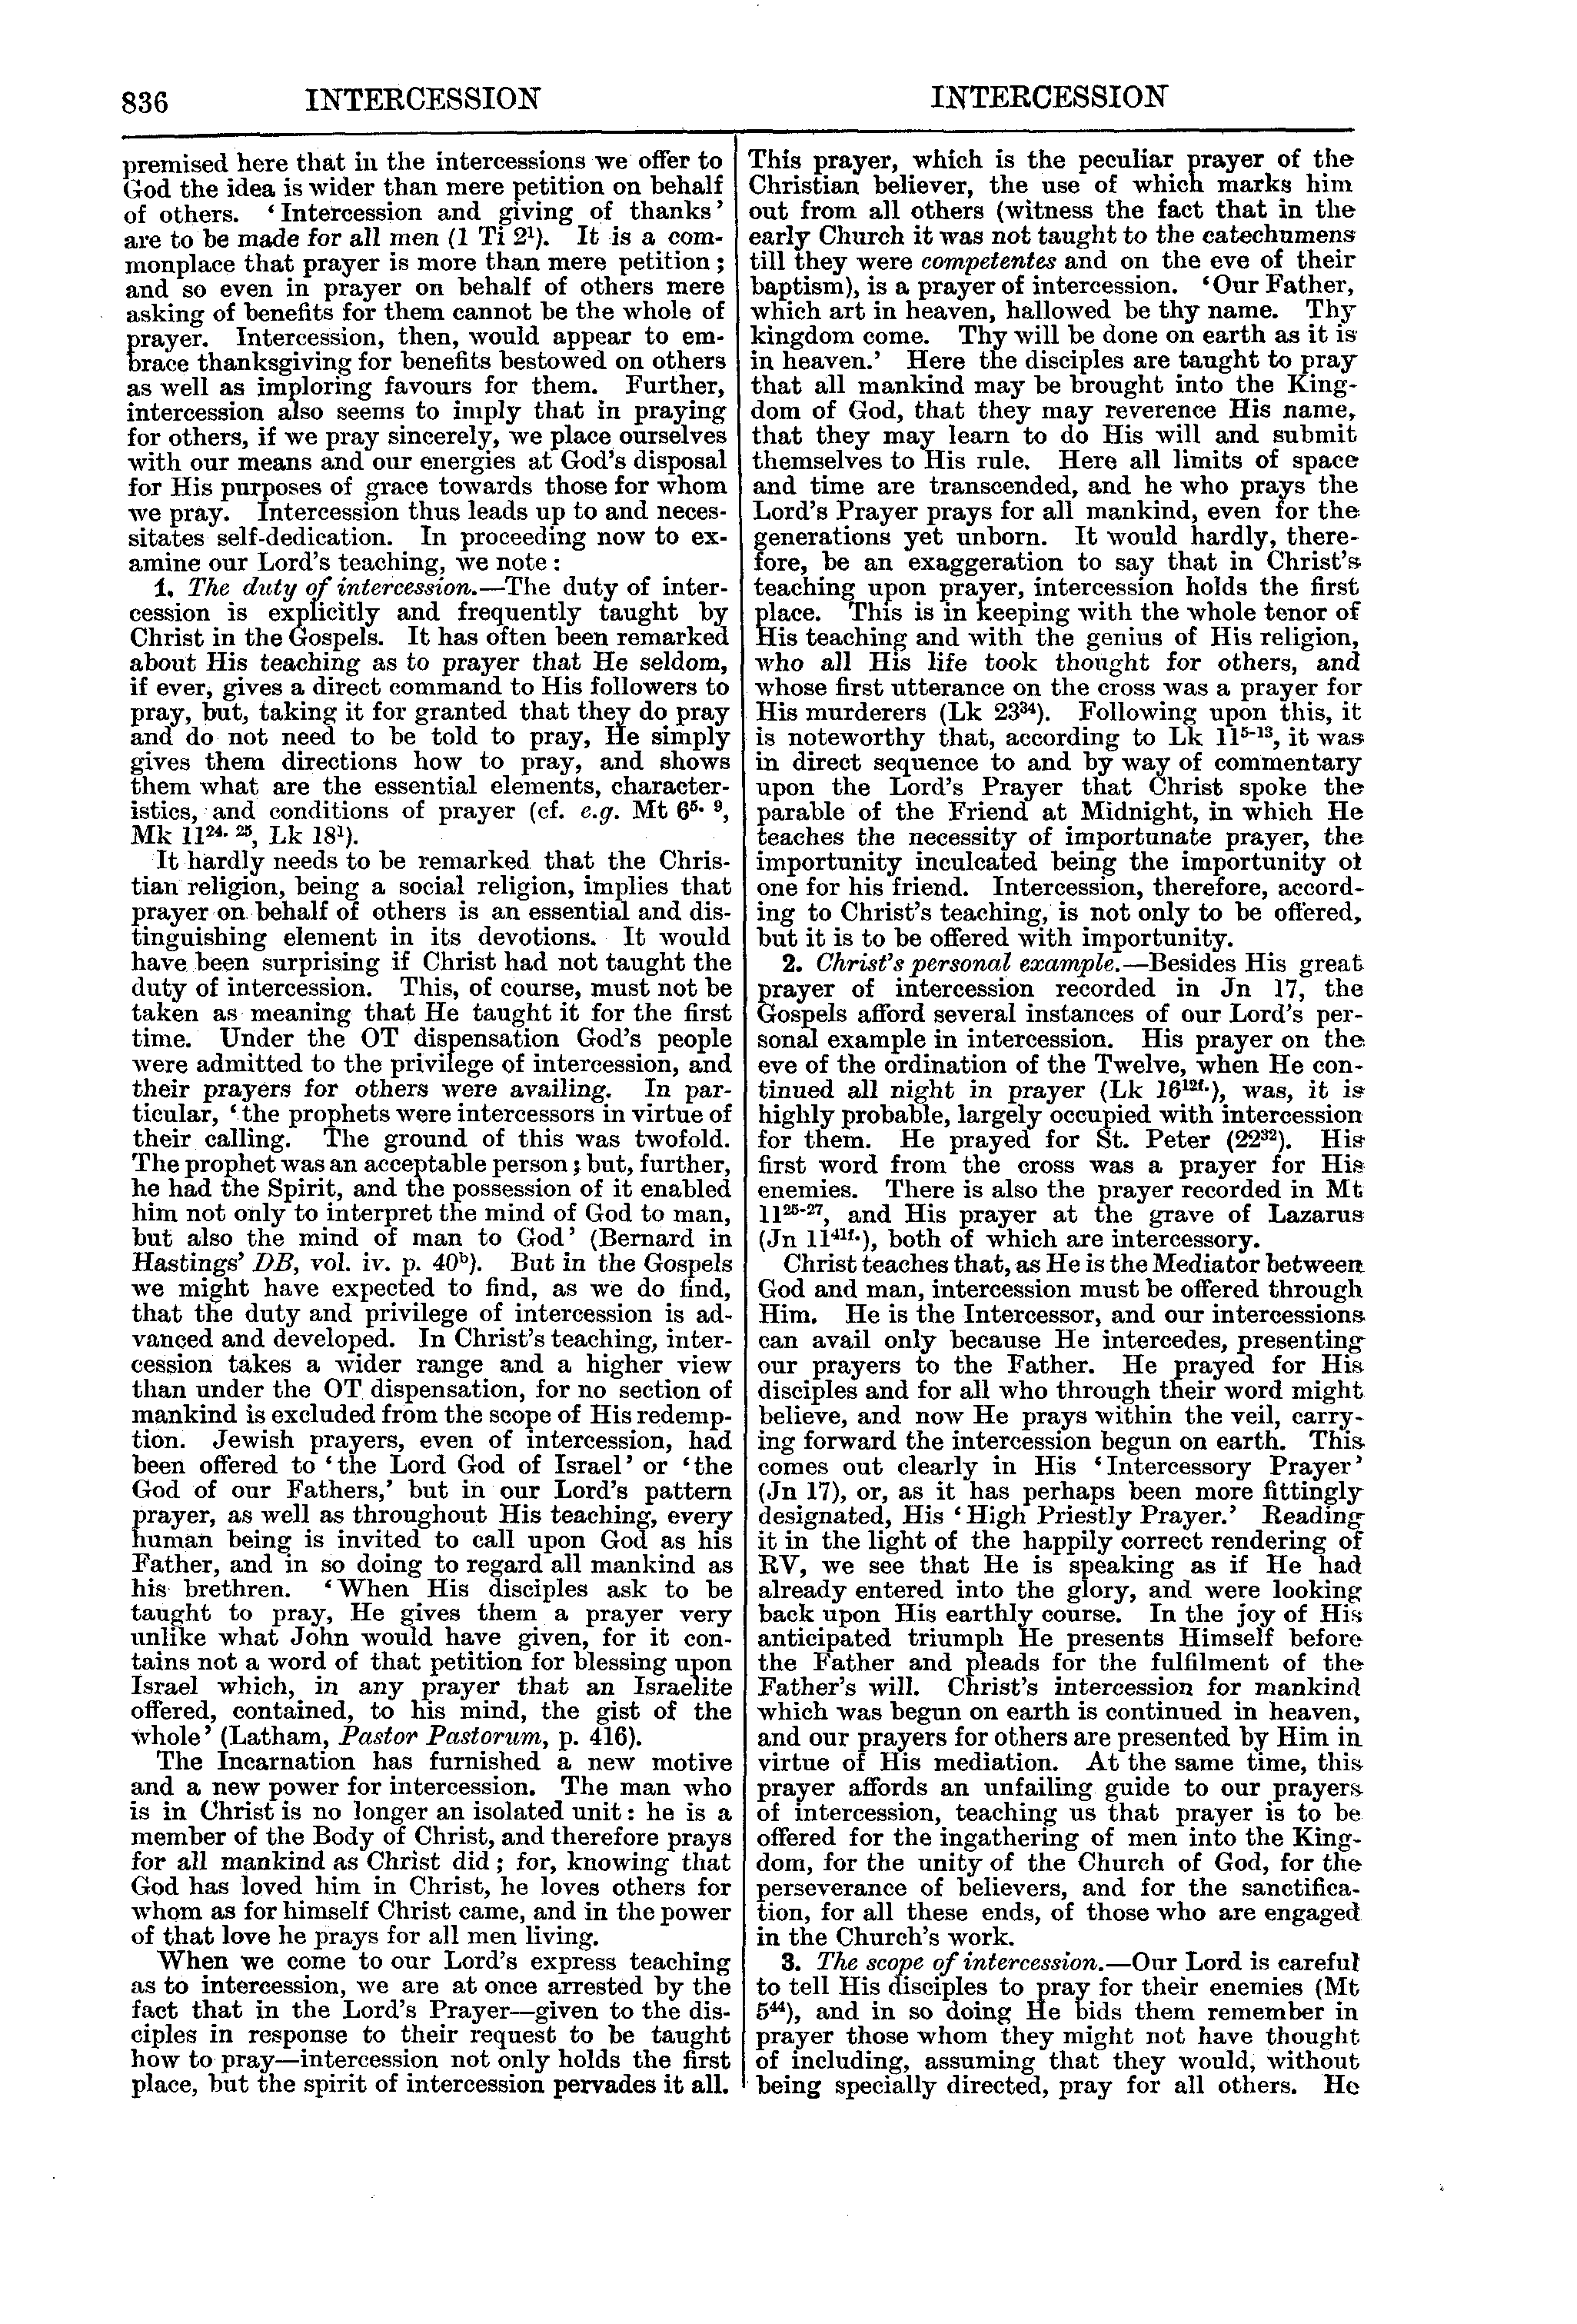 Image of page 836